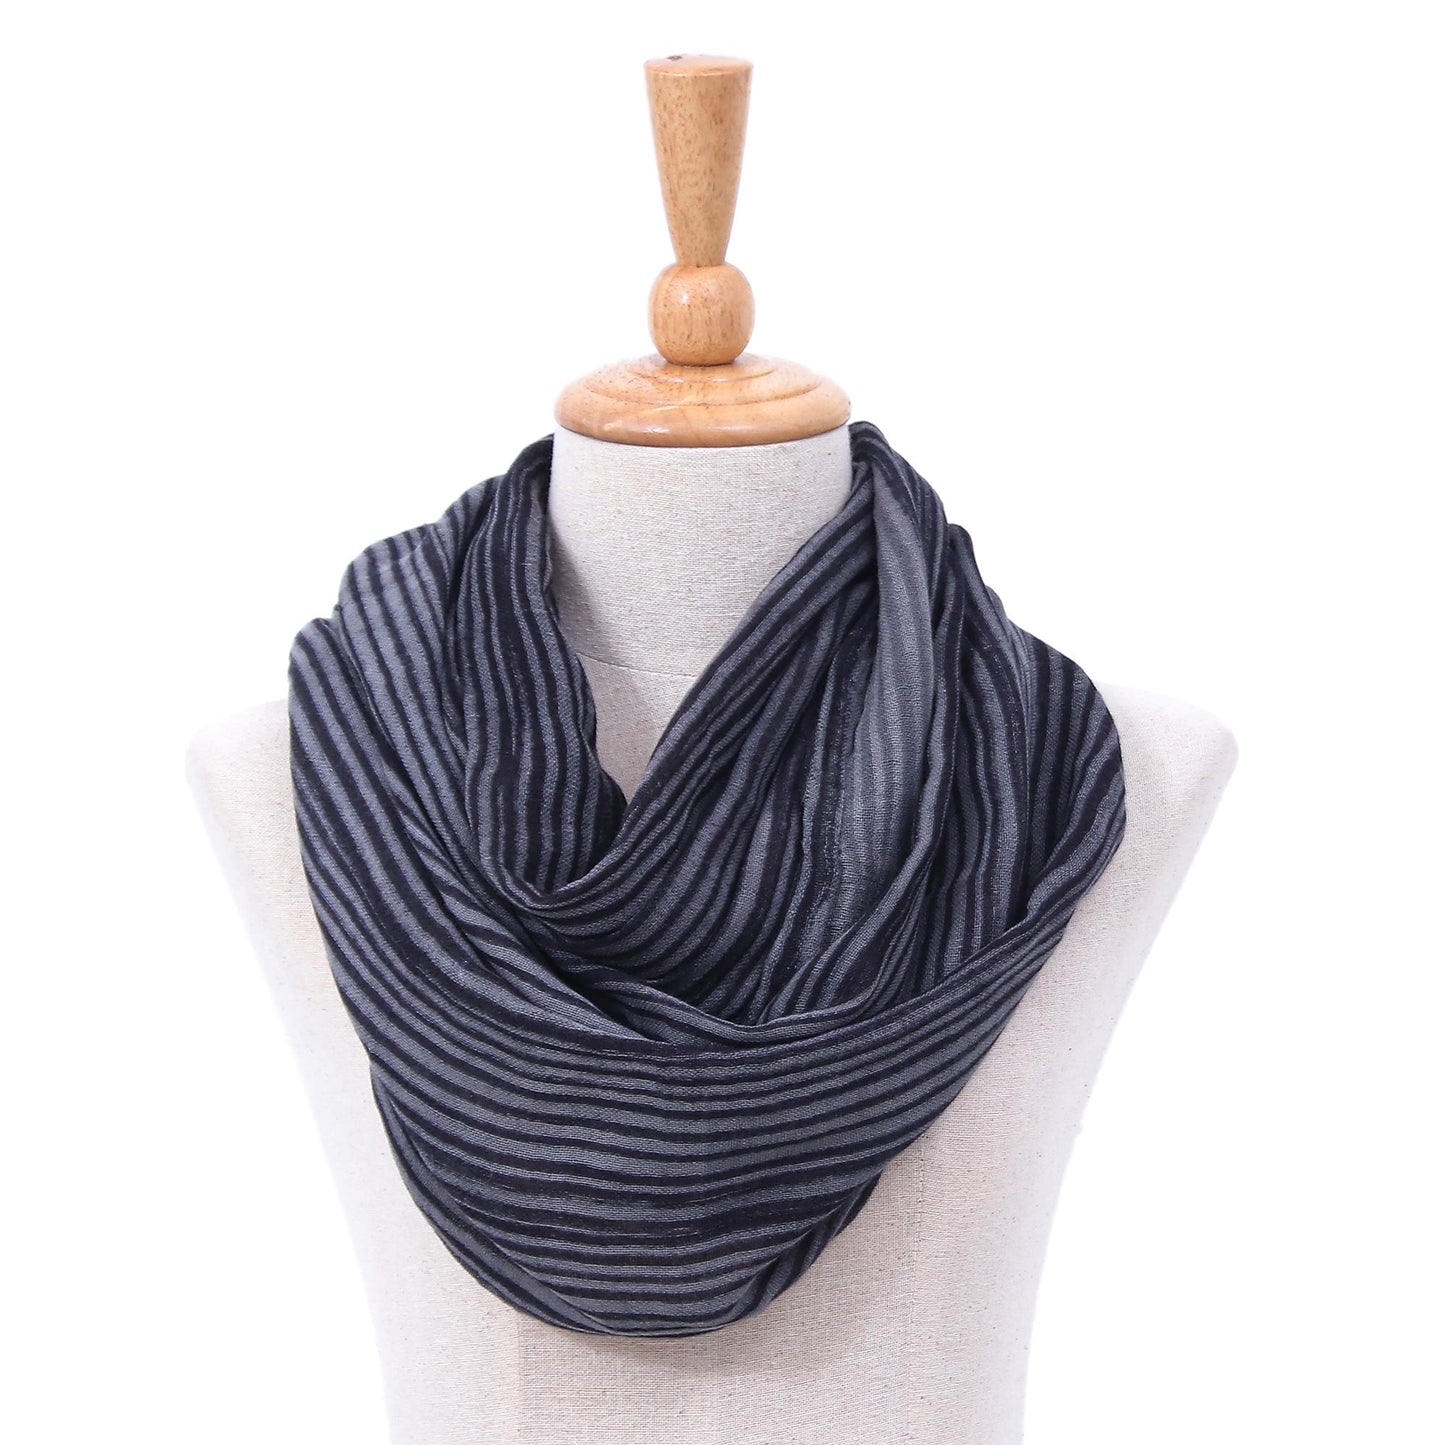 Smoke Hand Woven 100% Cotton Infinity Scarf in Black and White